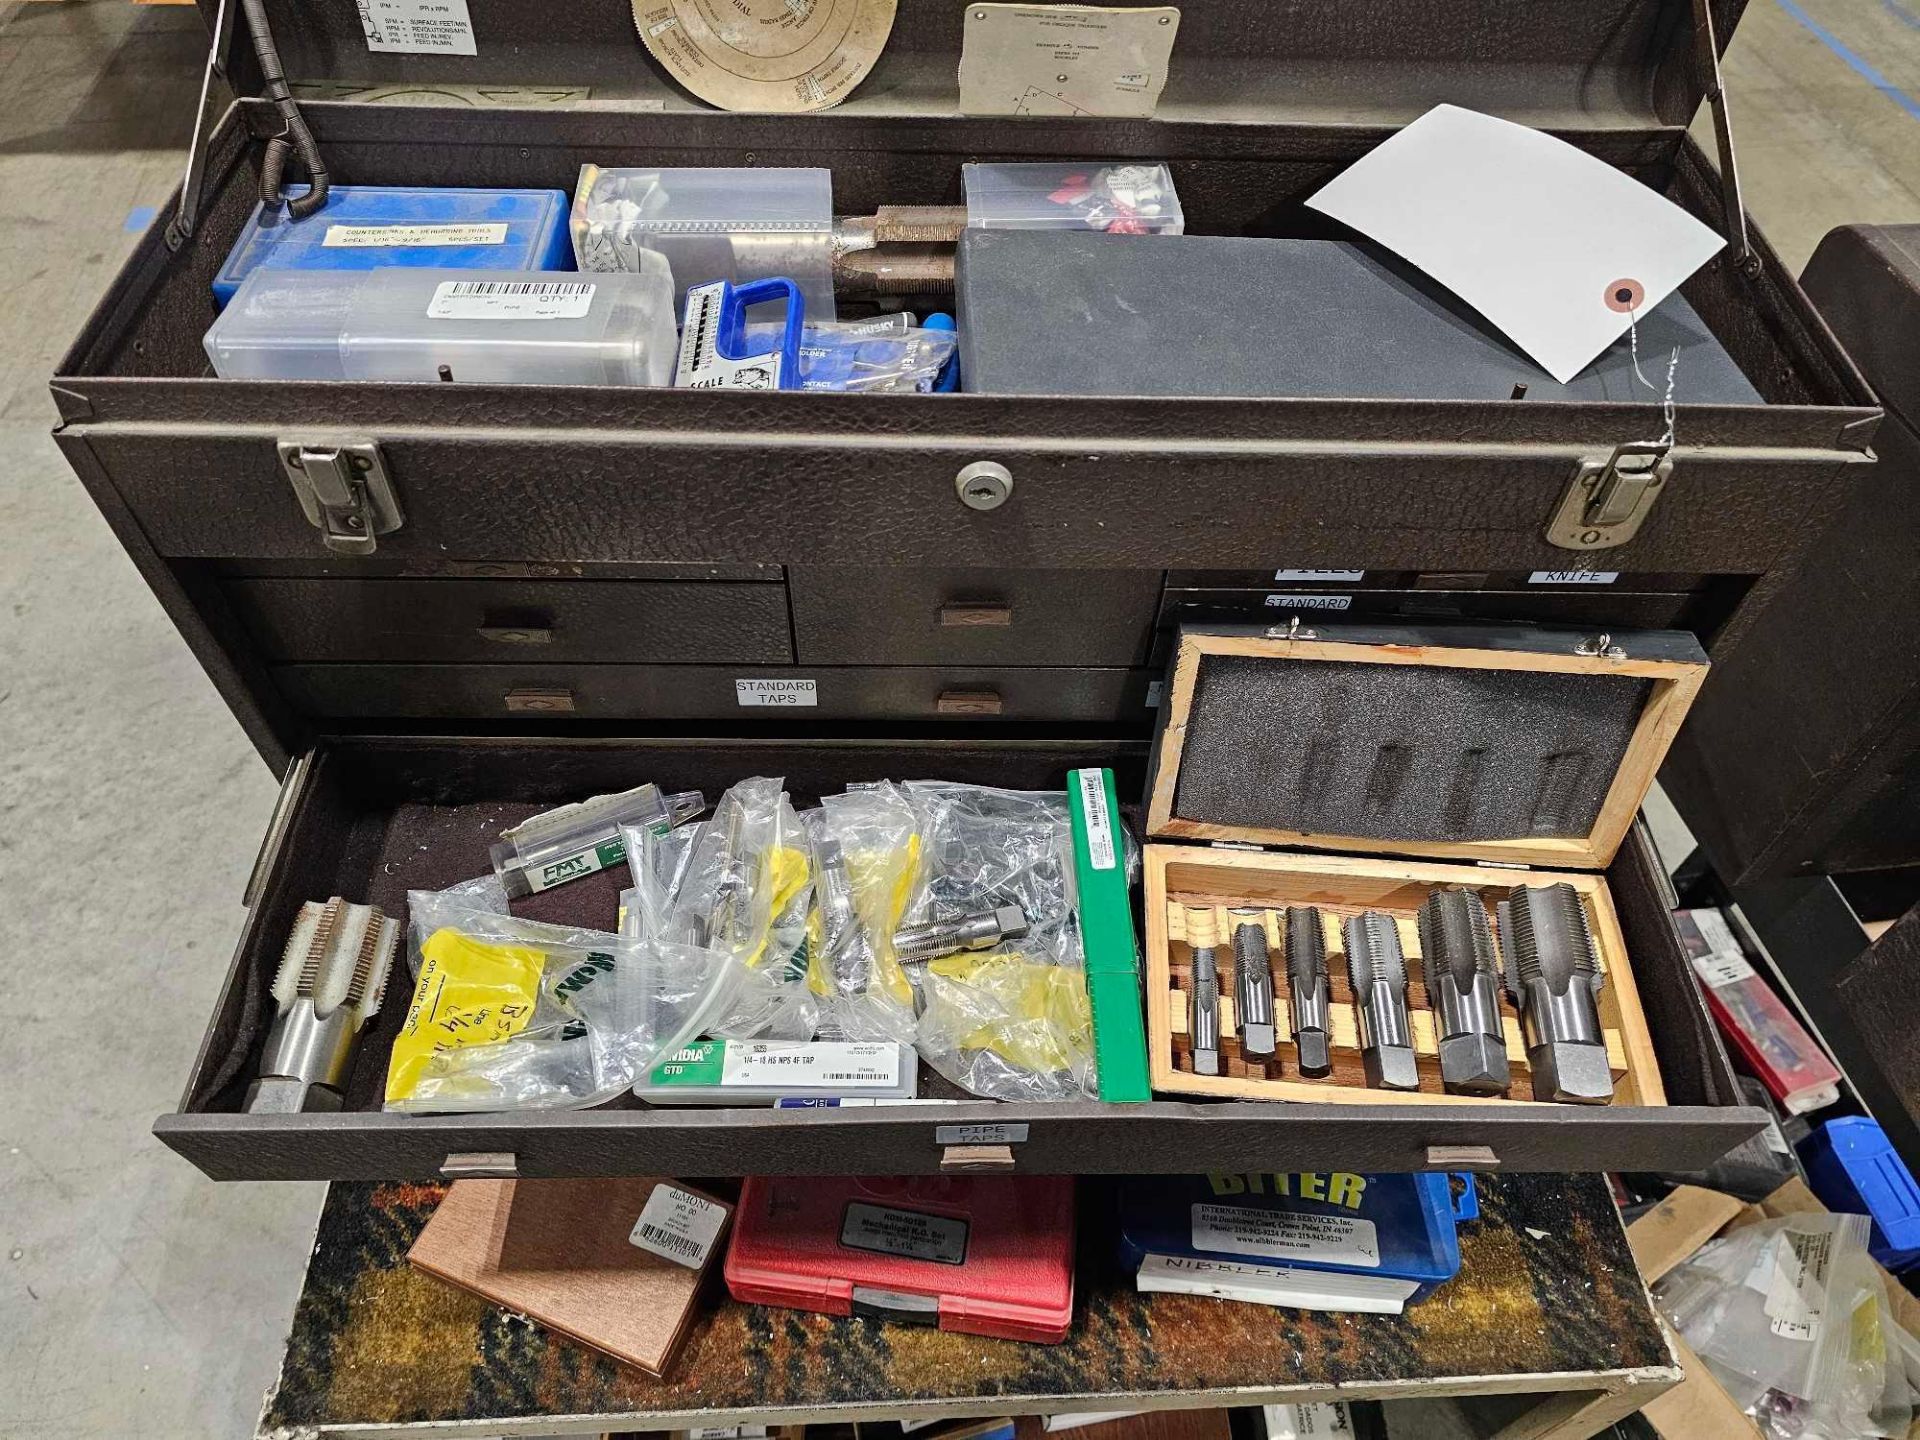 KENNEDY TOOL BOXES LOADED WITH MACHINISTS TOOLS AND MEASURING DEVICES - Image 14 of 45